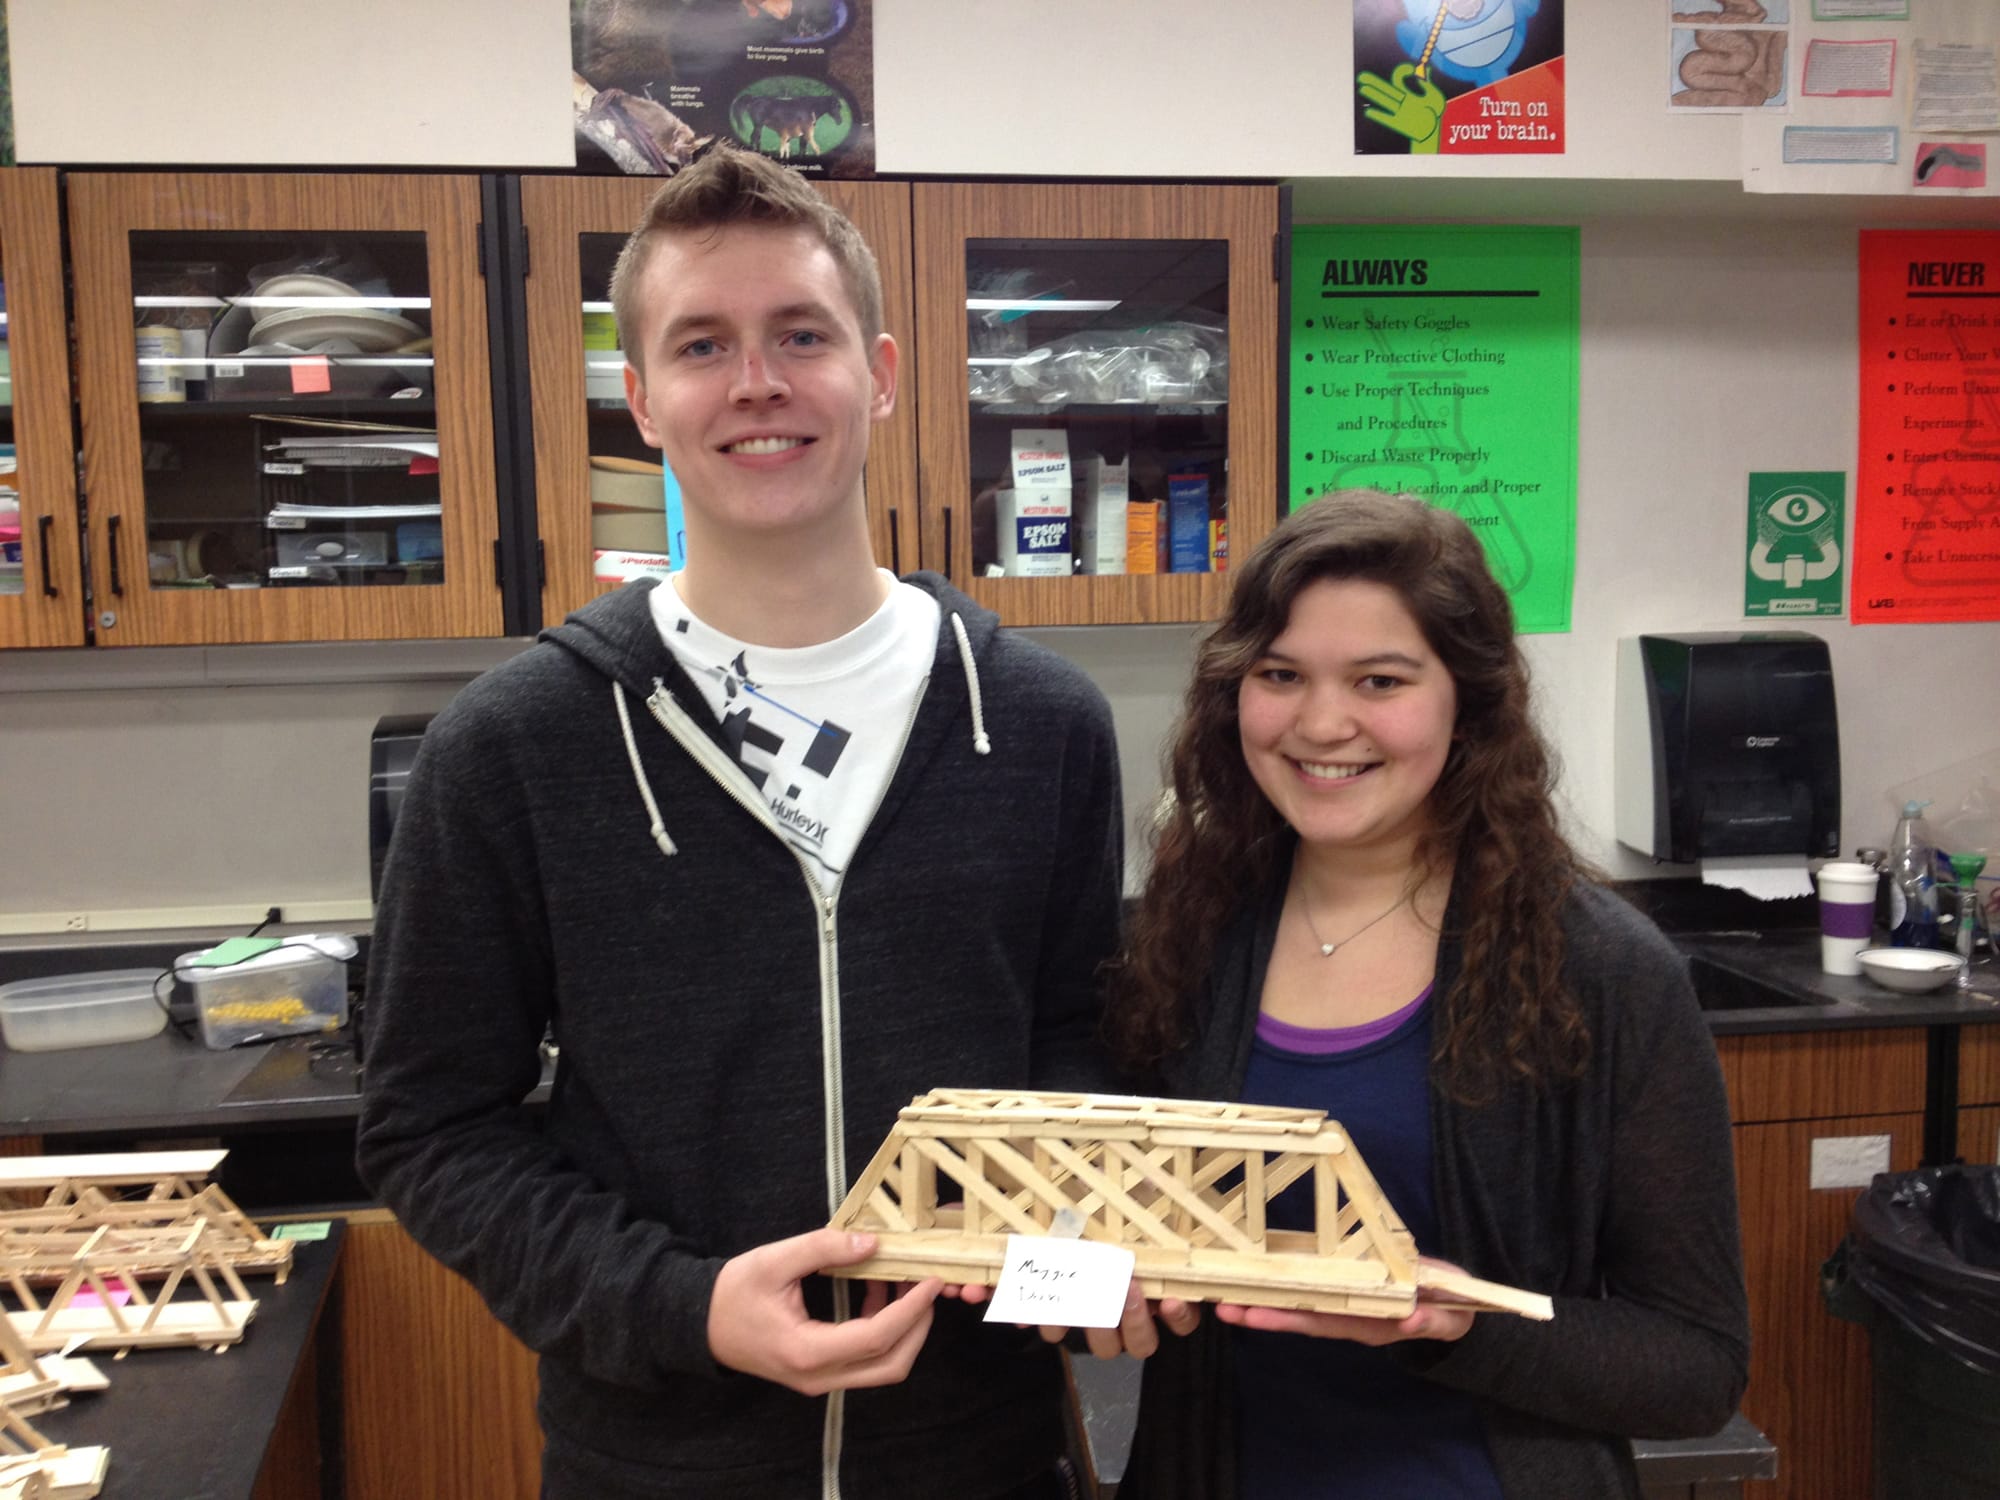 Ridgefield: Daniel Palomaki and Maggie Yaddof won the high school bridge building physics contest with this highly engineered popsickle-stick and balsa-wood creation.